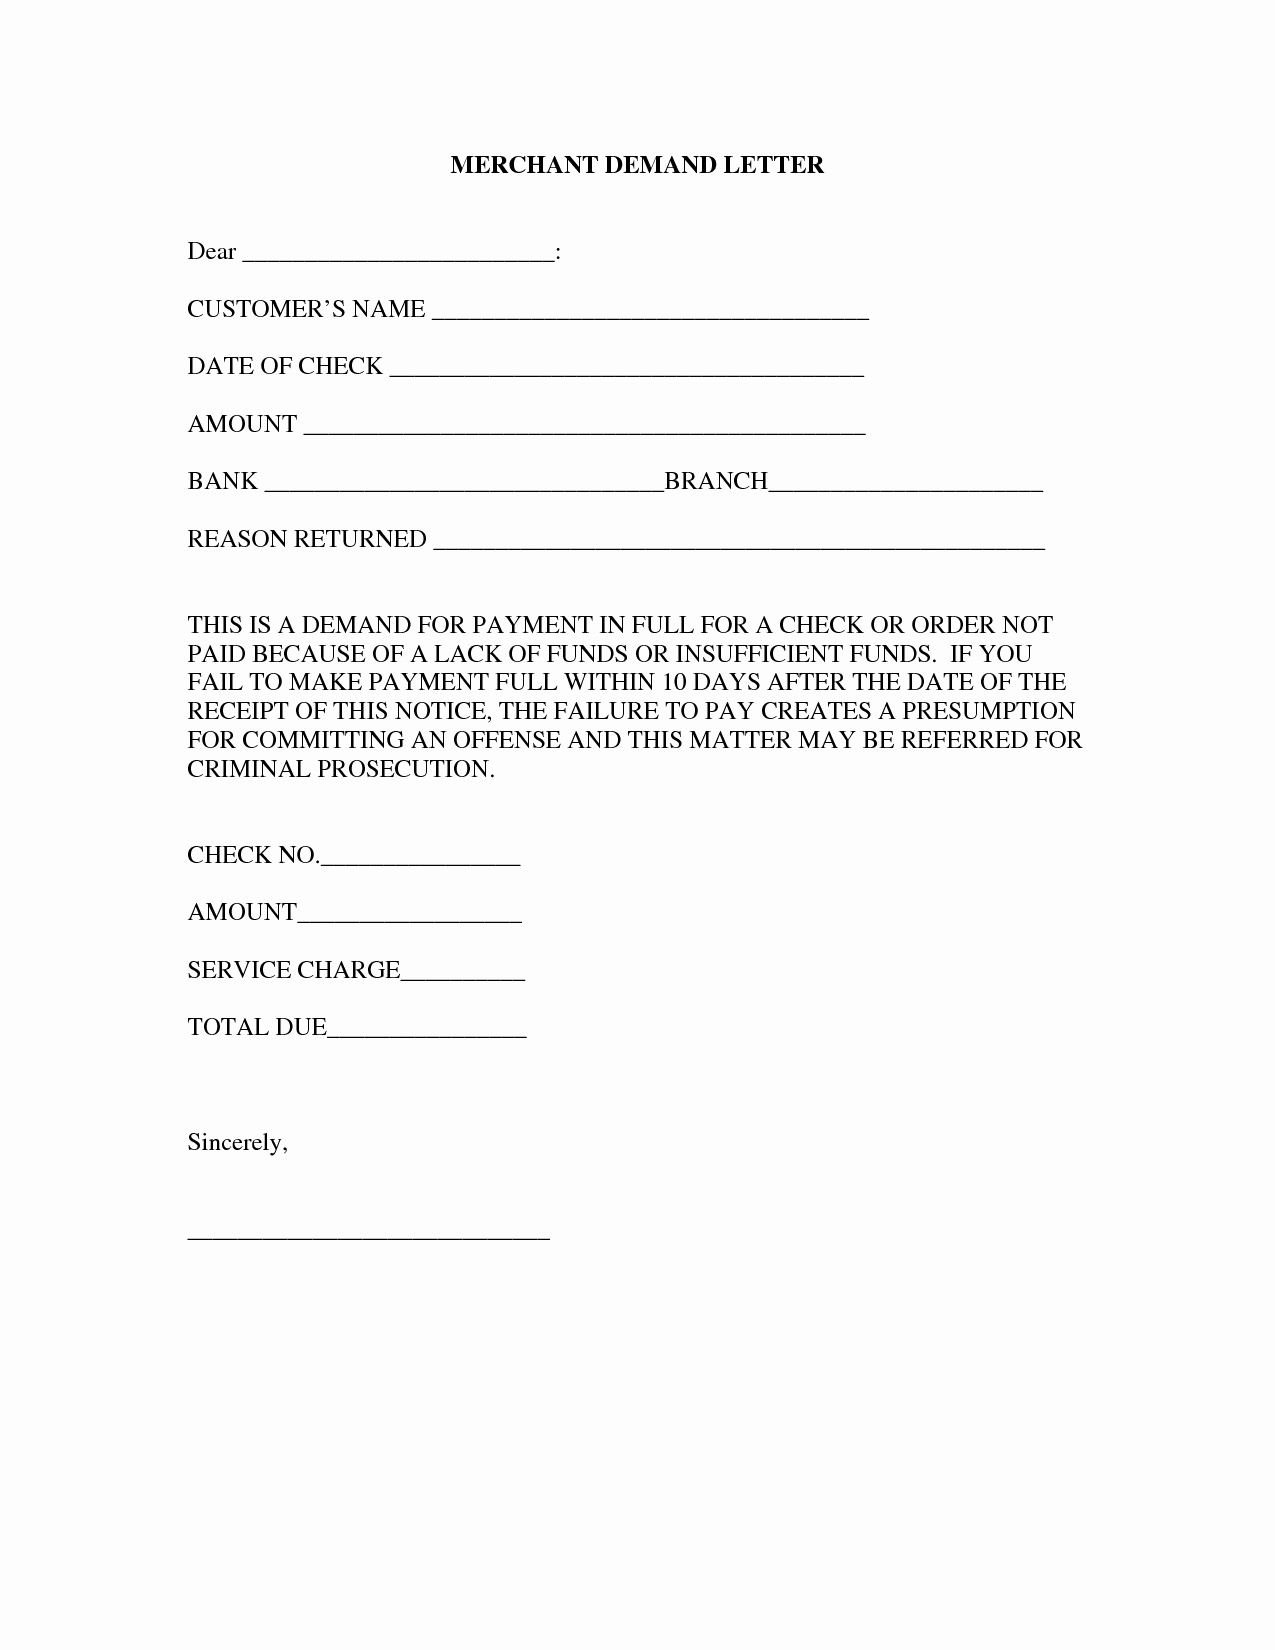 Promise to Pay Contract Template Portablegasgrillweber